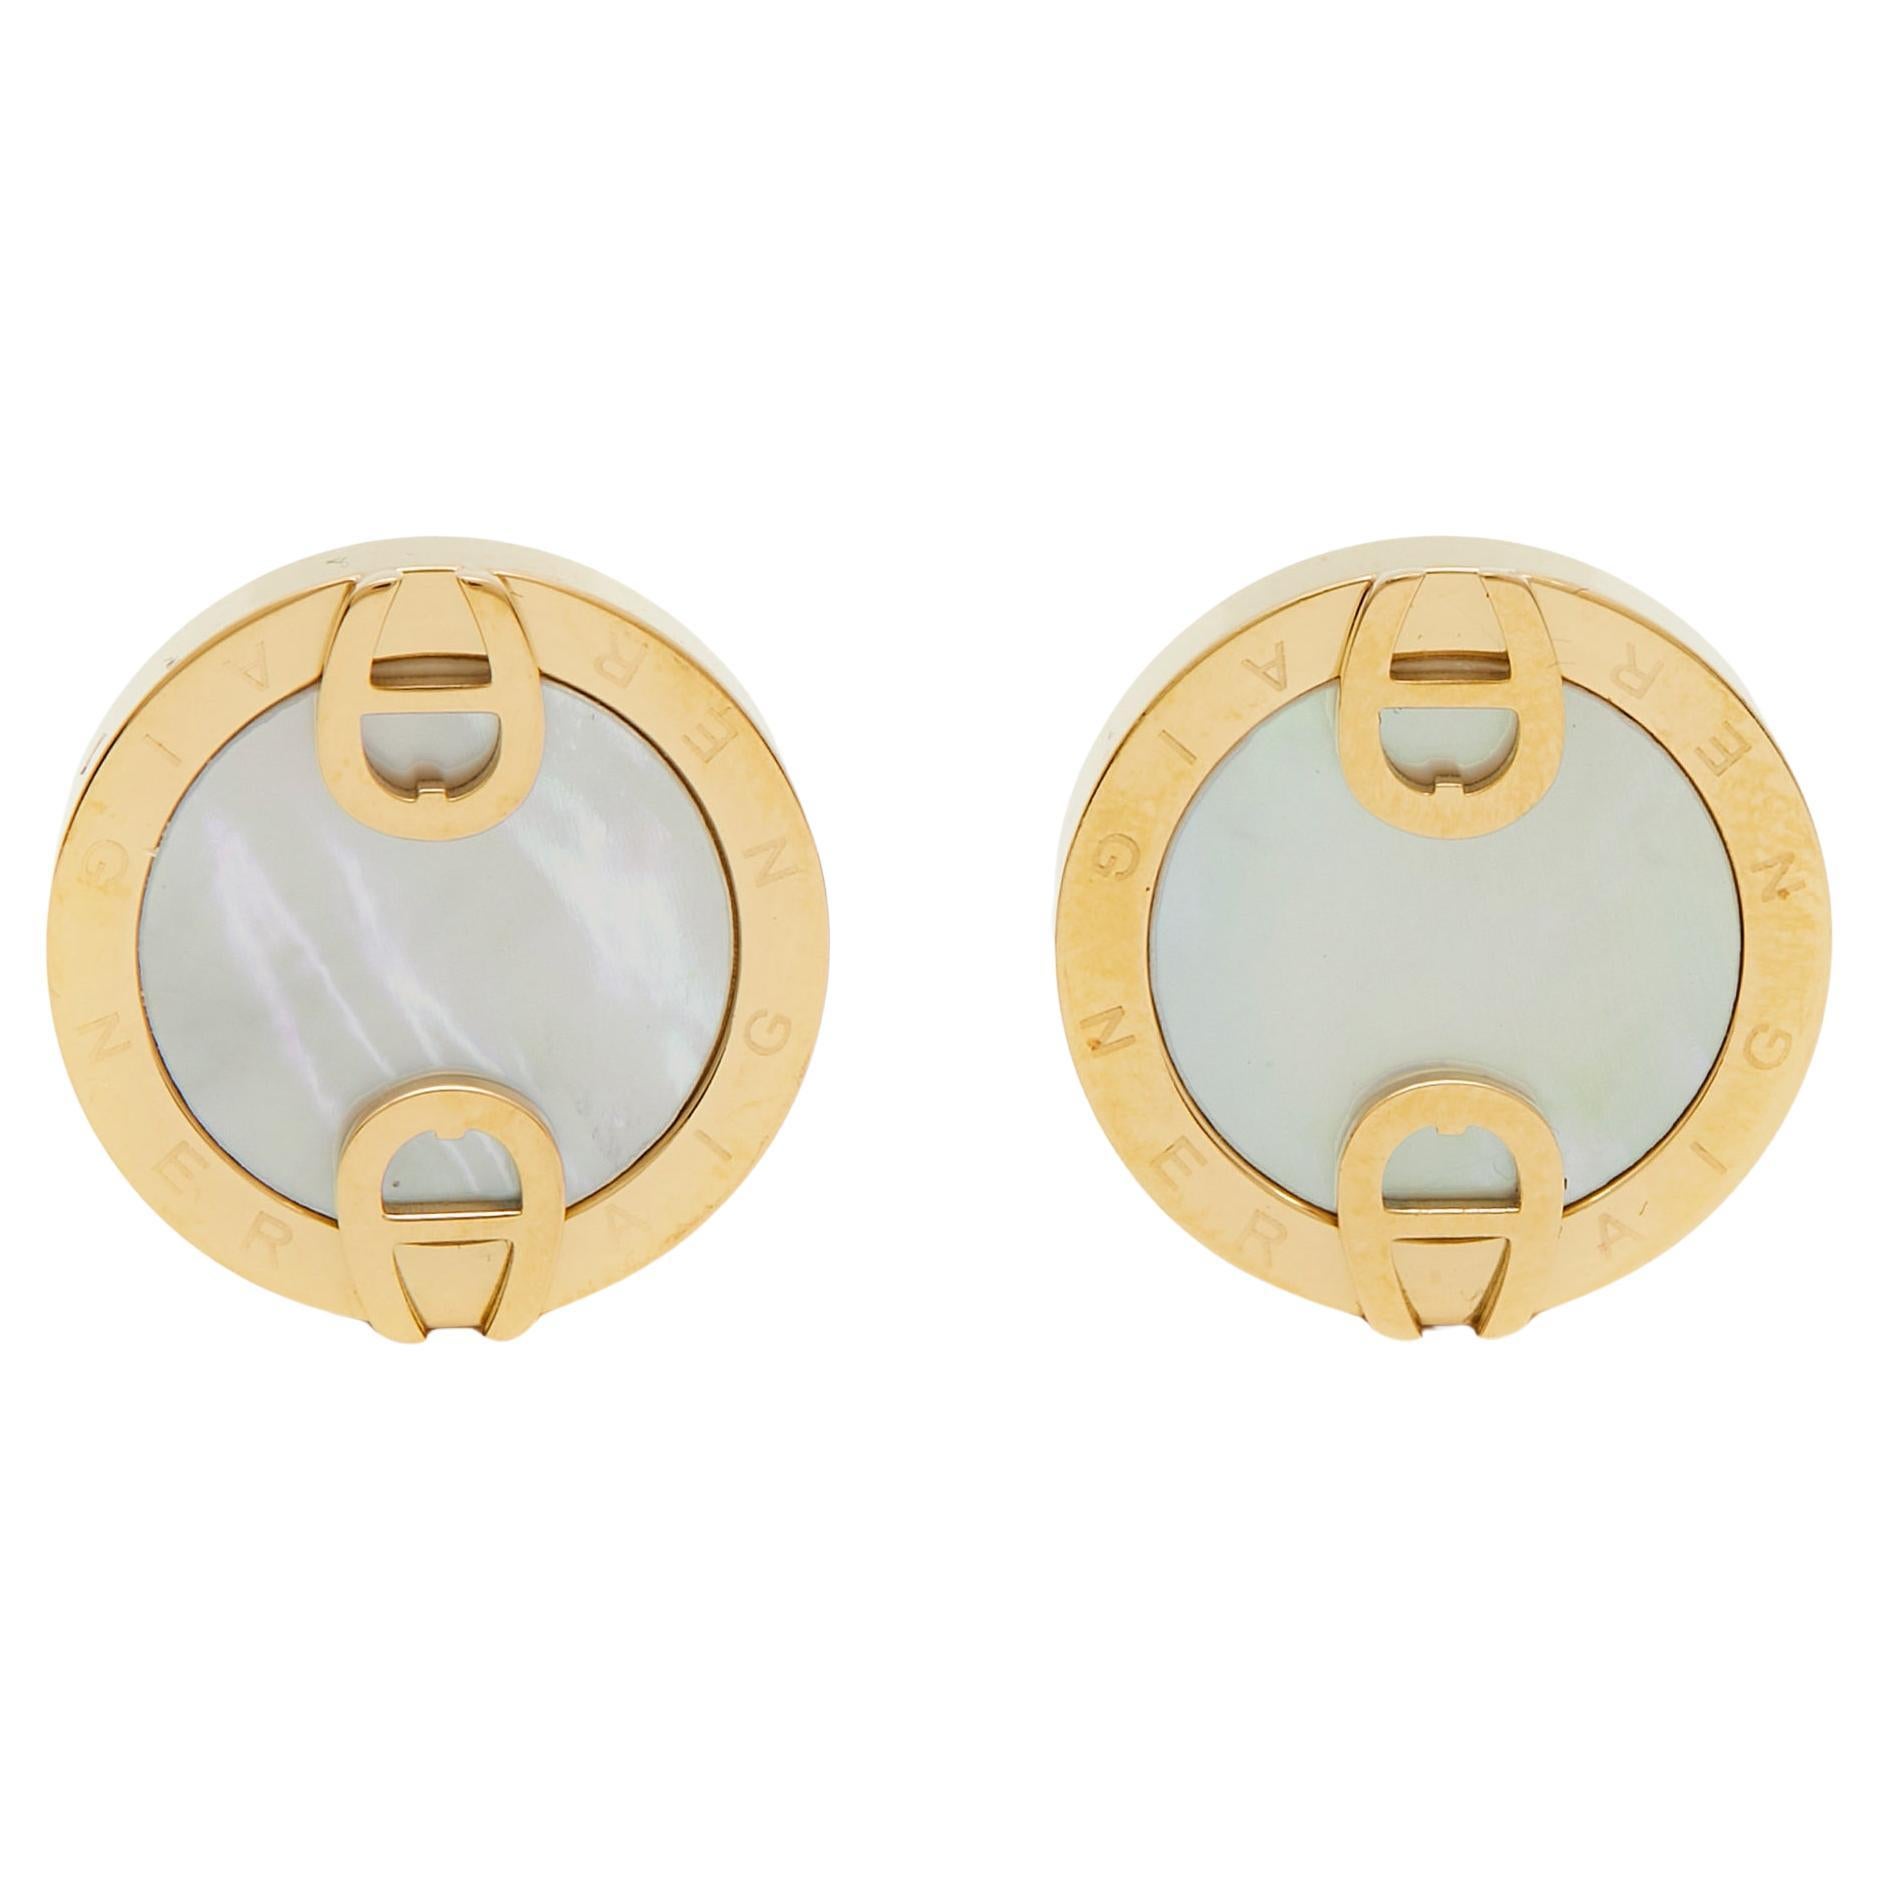 Aigner Mother of Pearl Gold Tone Cufflinks For Sale